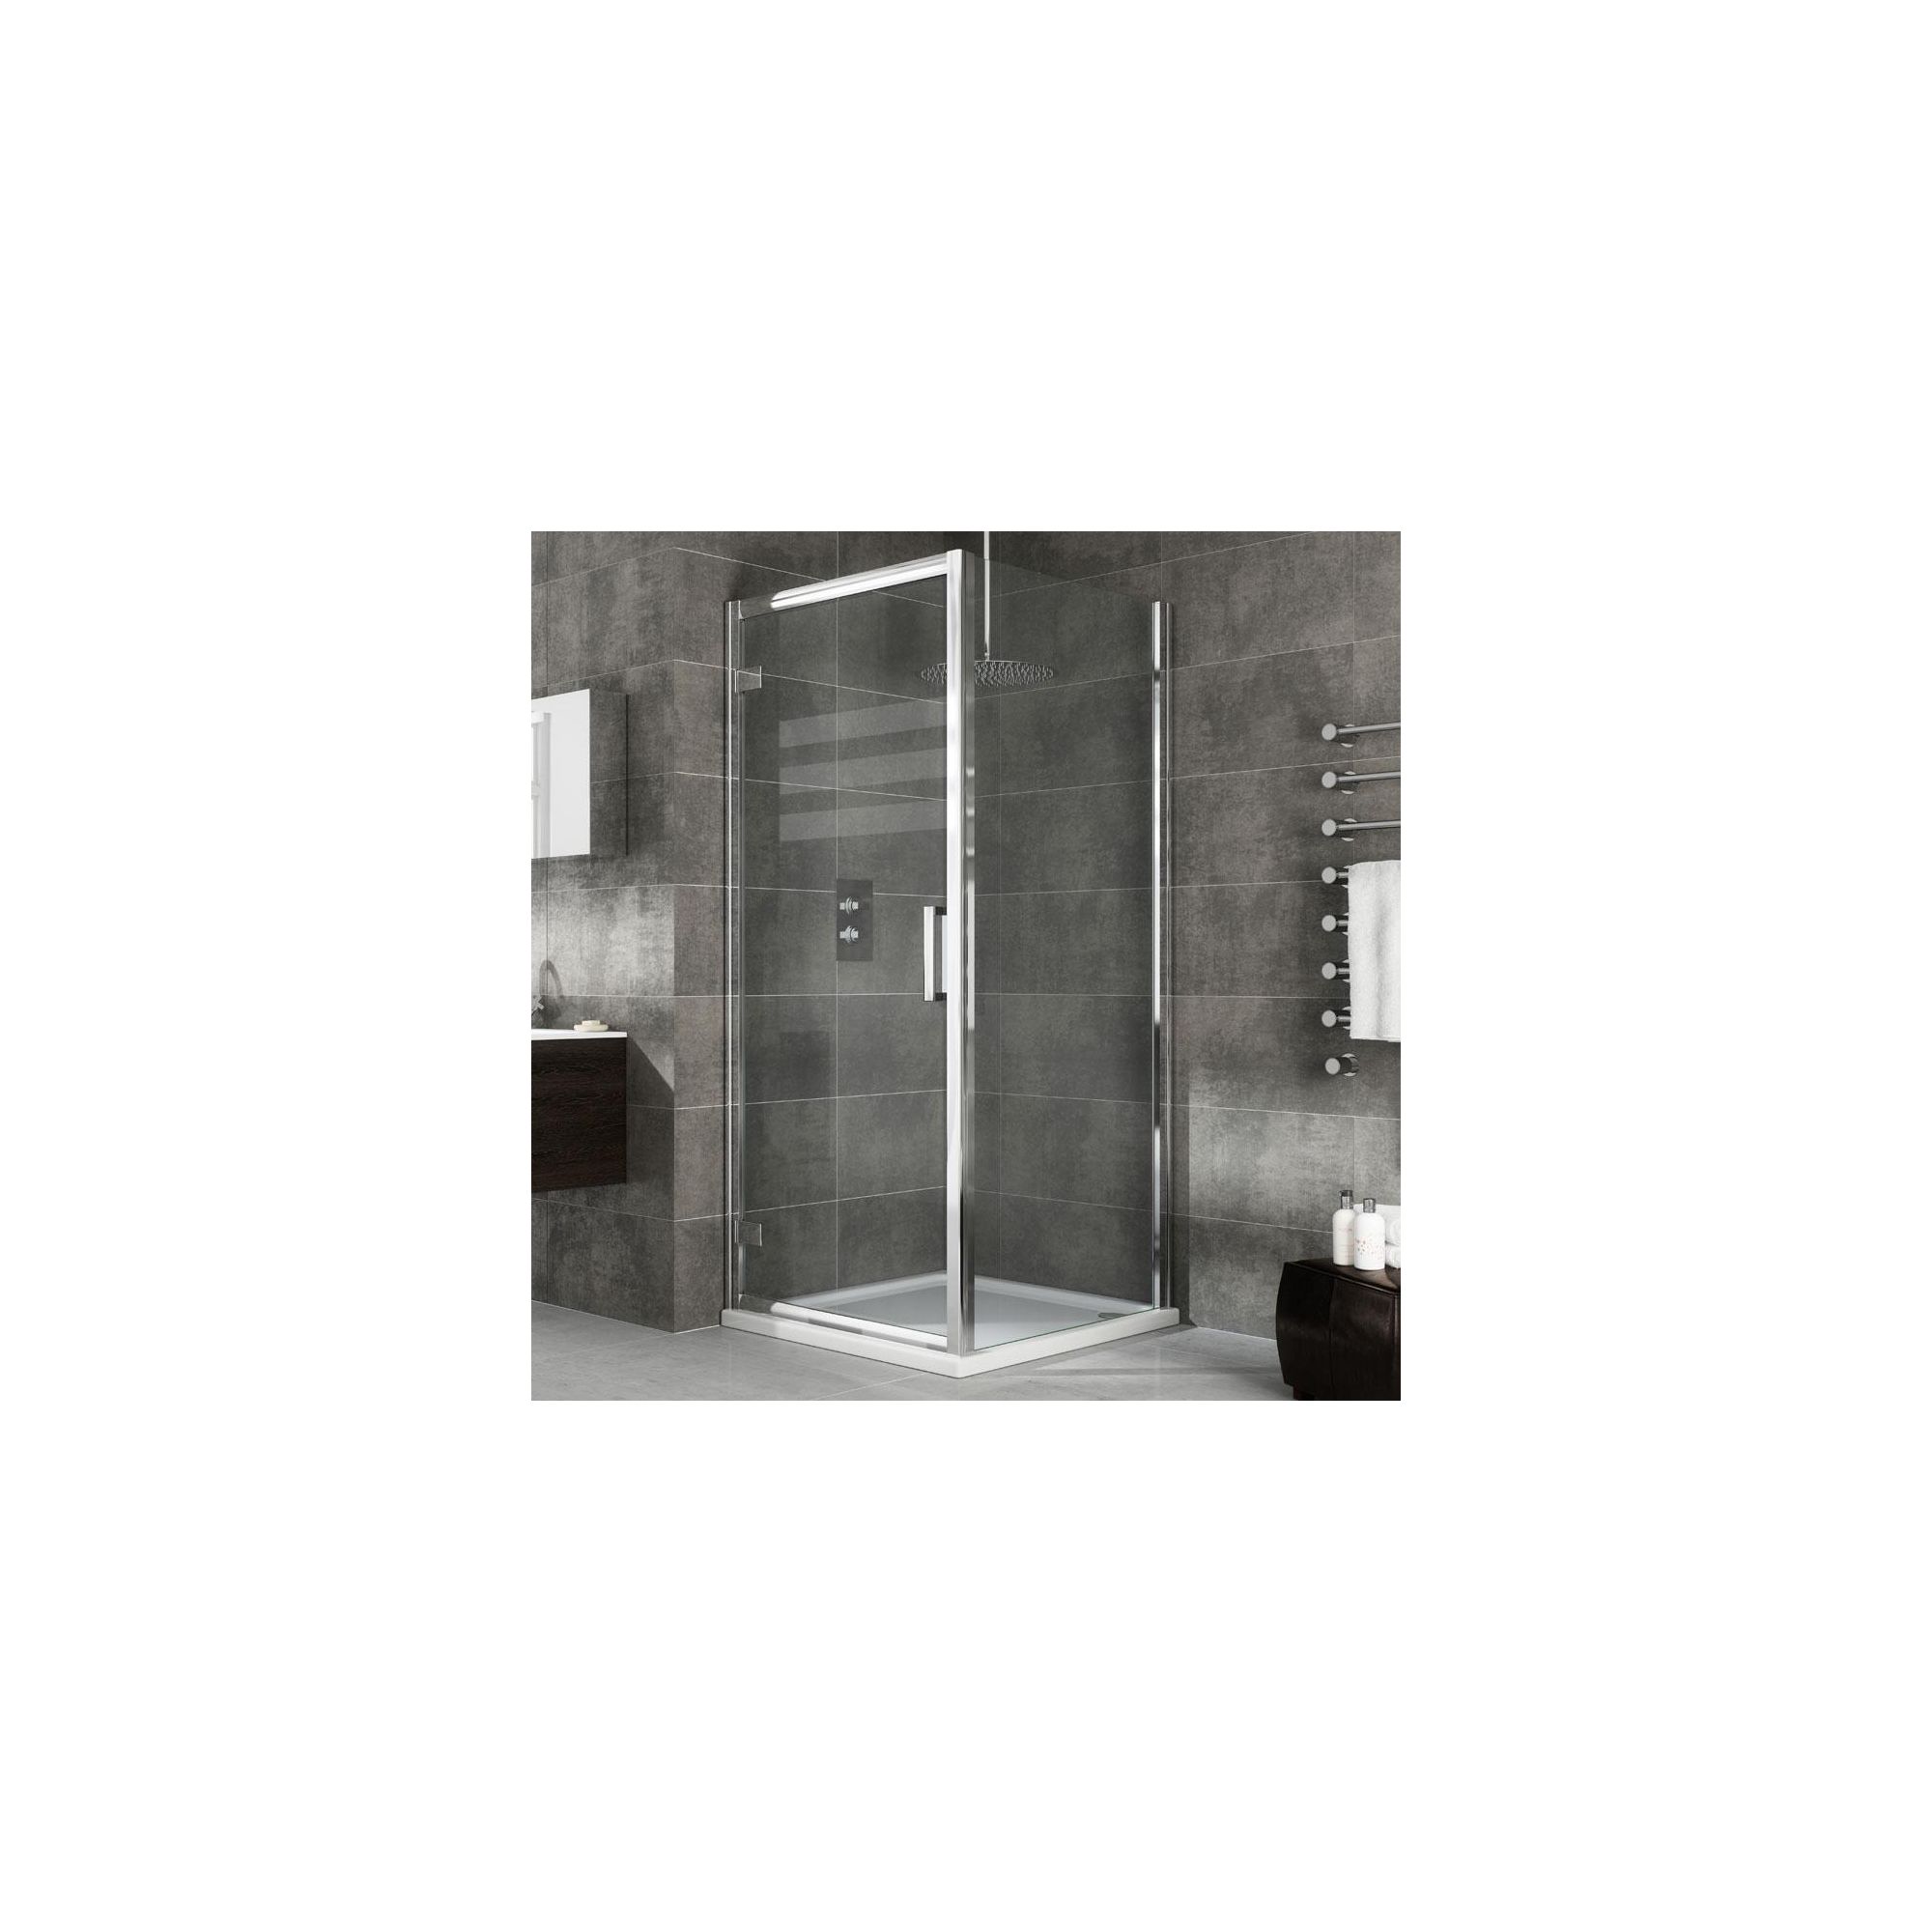 Elemis Eternity Hinged Door Shower Enclosure, 1000mm x 900mm, 8mm Glass, Low Profile Tray at Tescos Direct